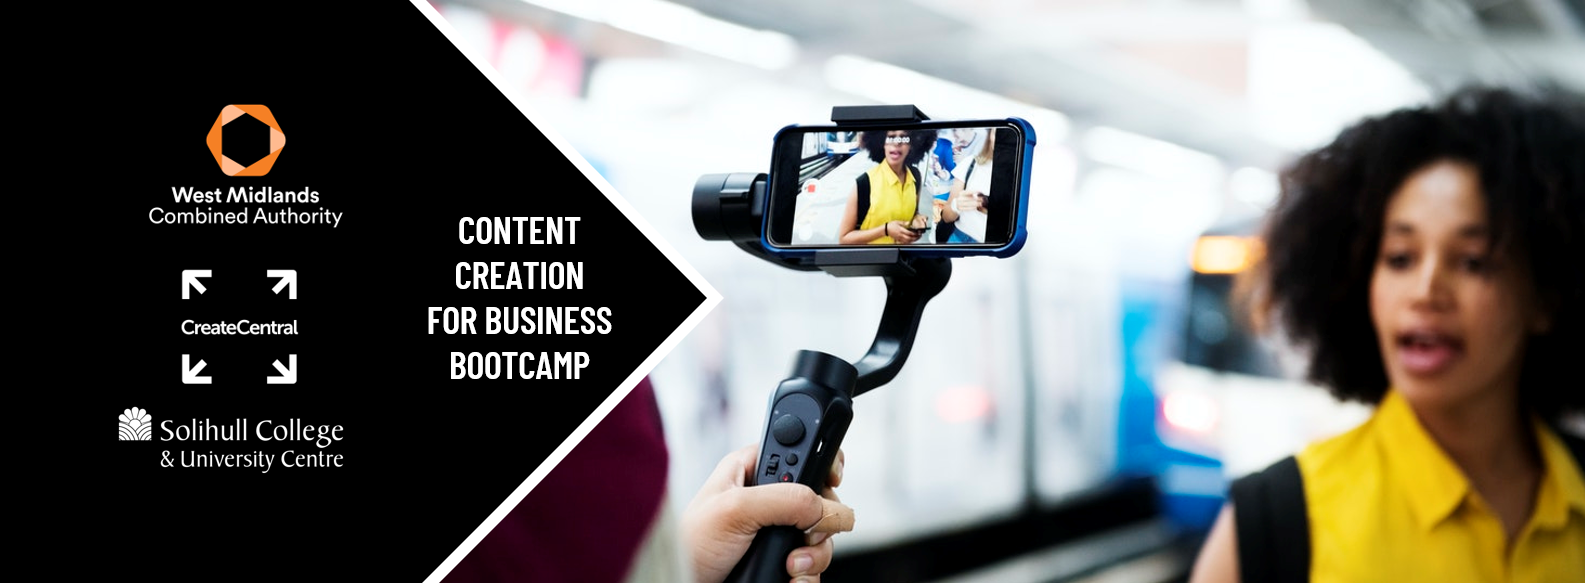 Content Creation for Business Bootcamp